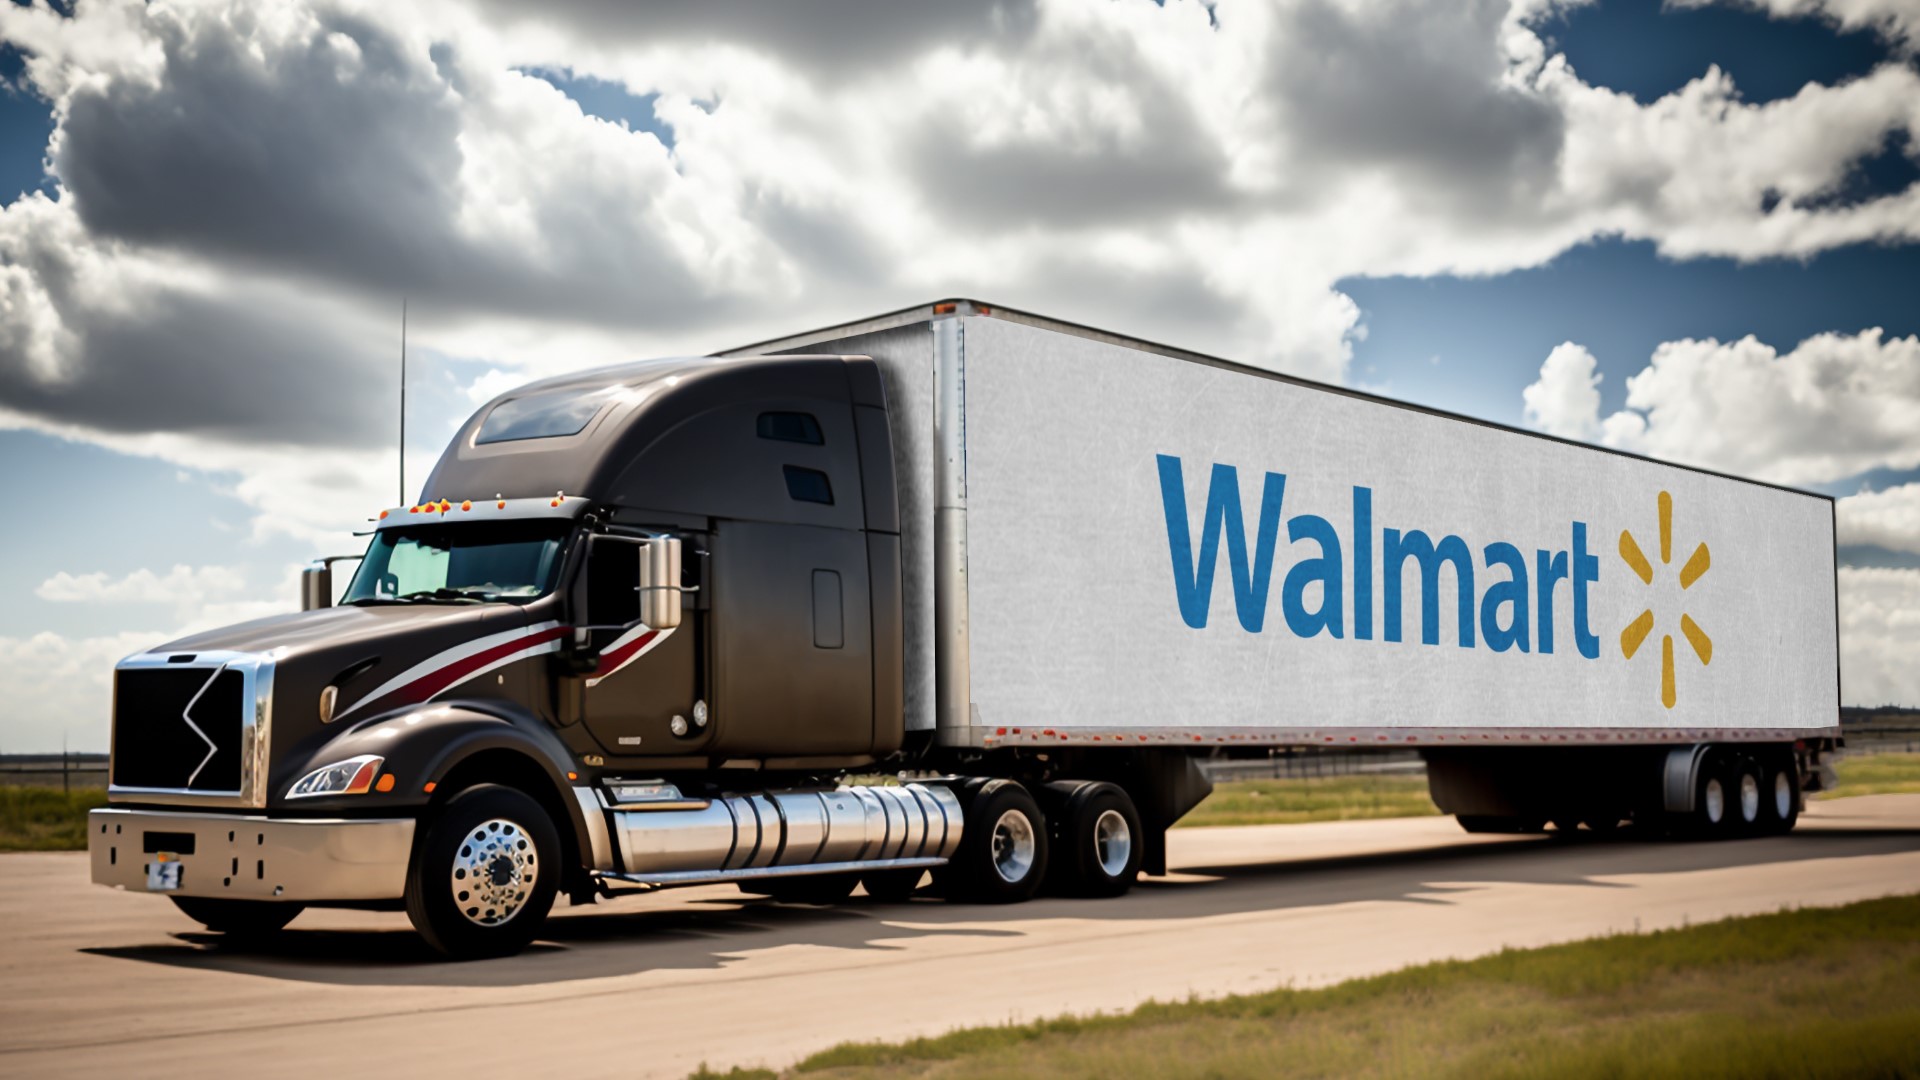 Walmart has unveiled a 15-liter natural gas zero-emission engine to power the future of it's shipping trucks.